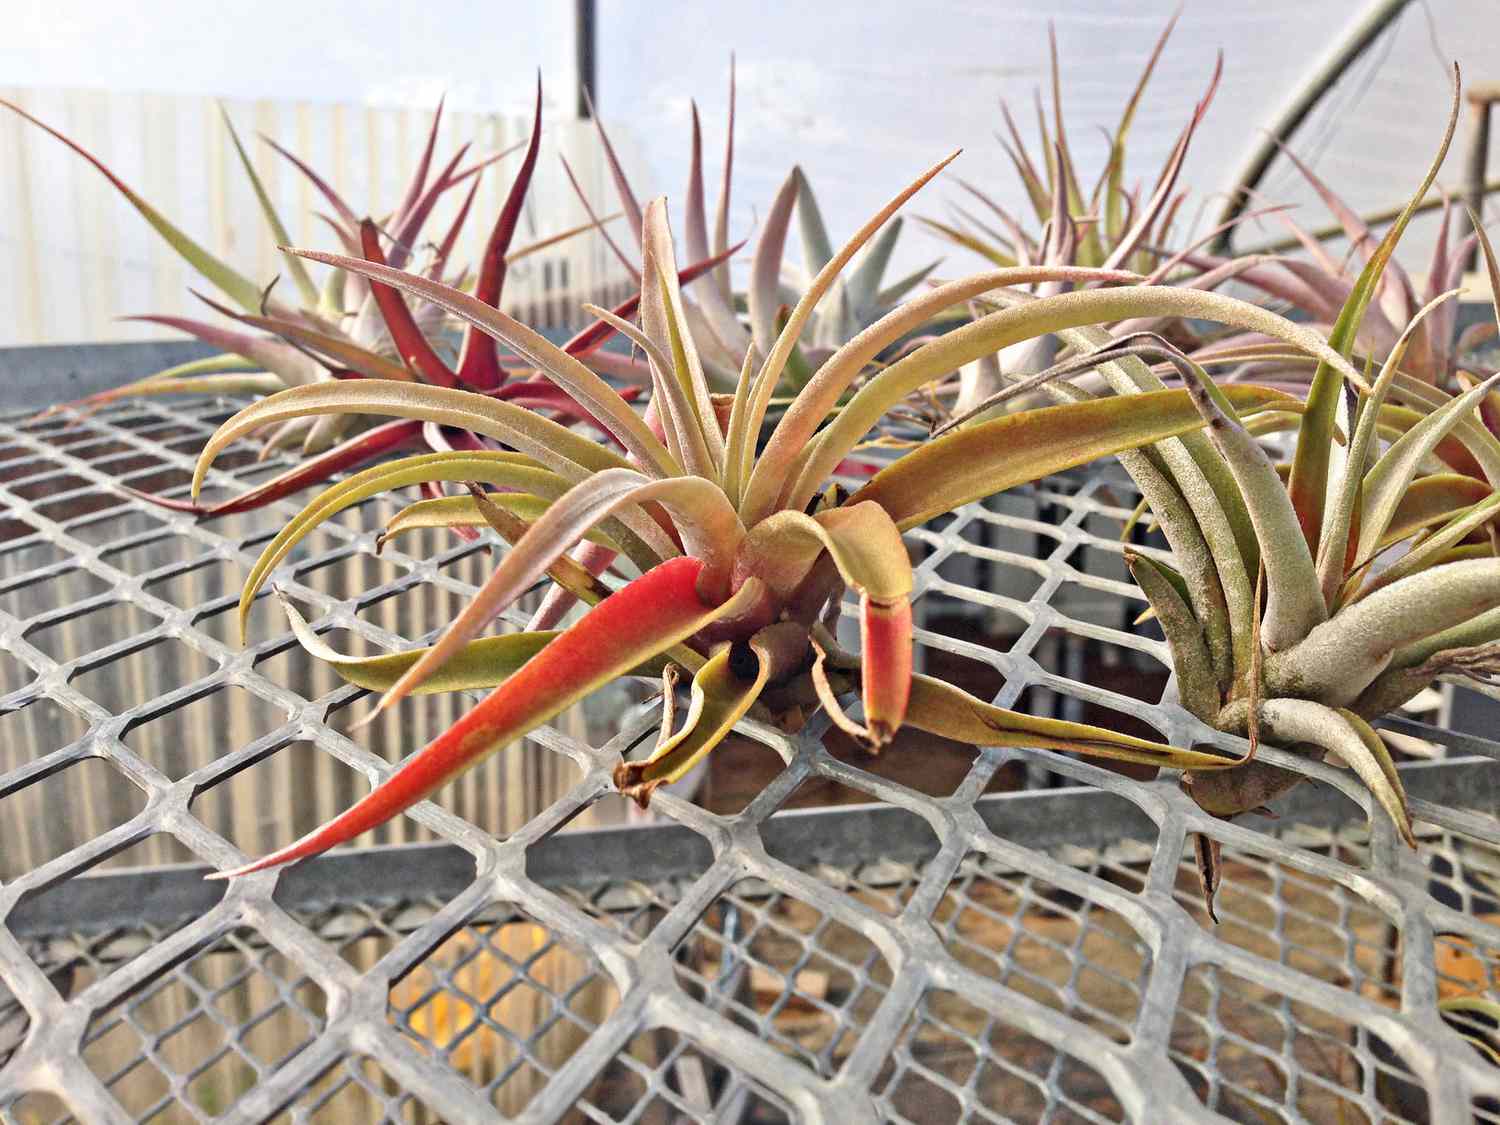 'Peach' air plant with green, yellow, and orange tones